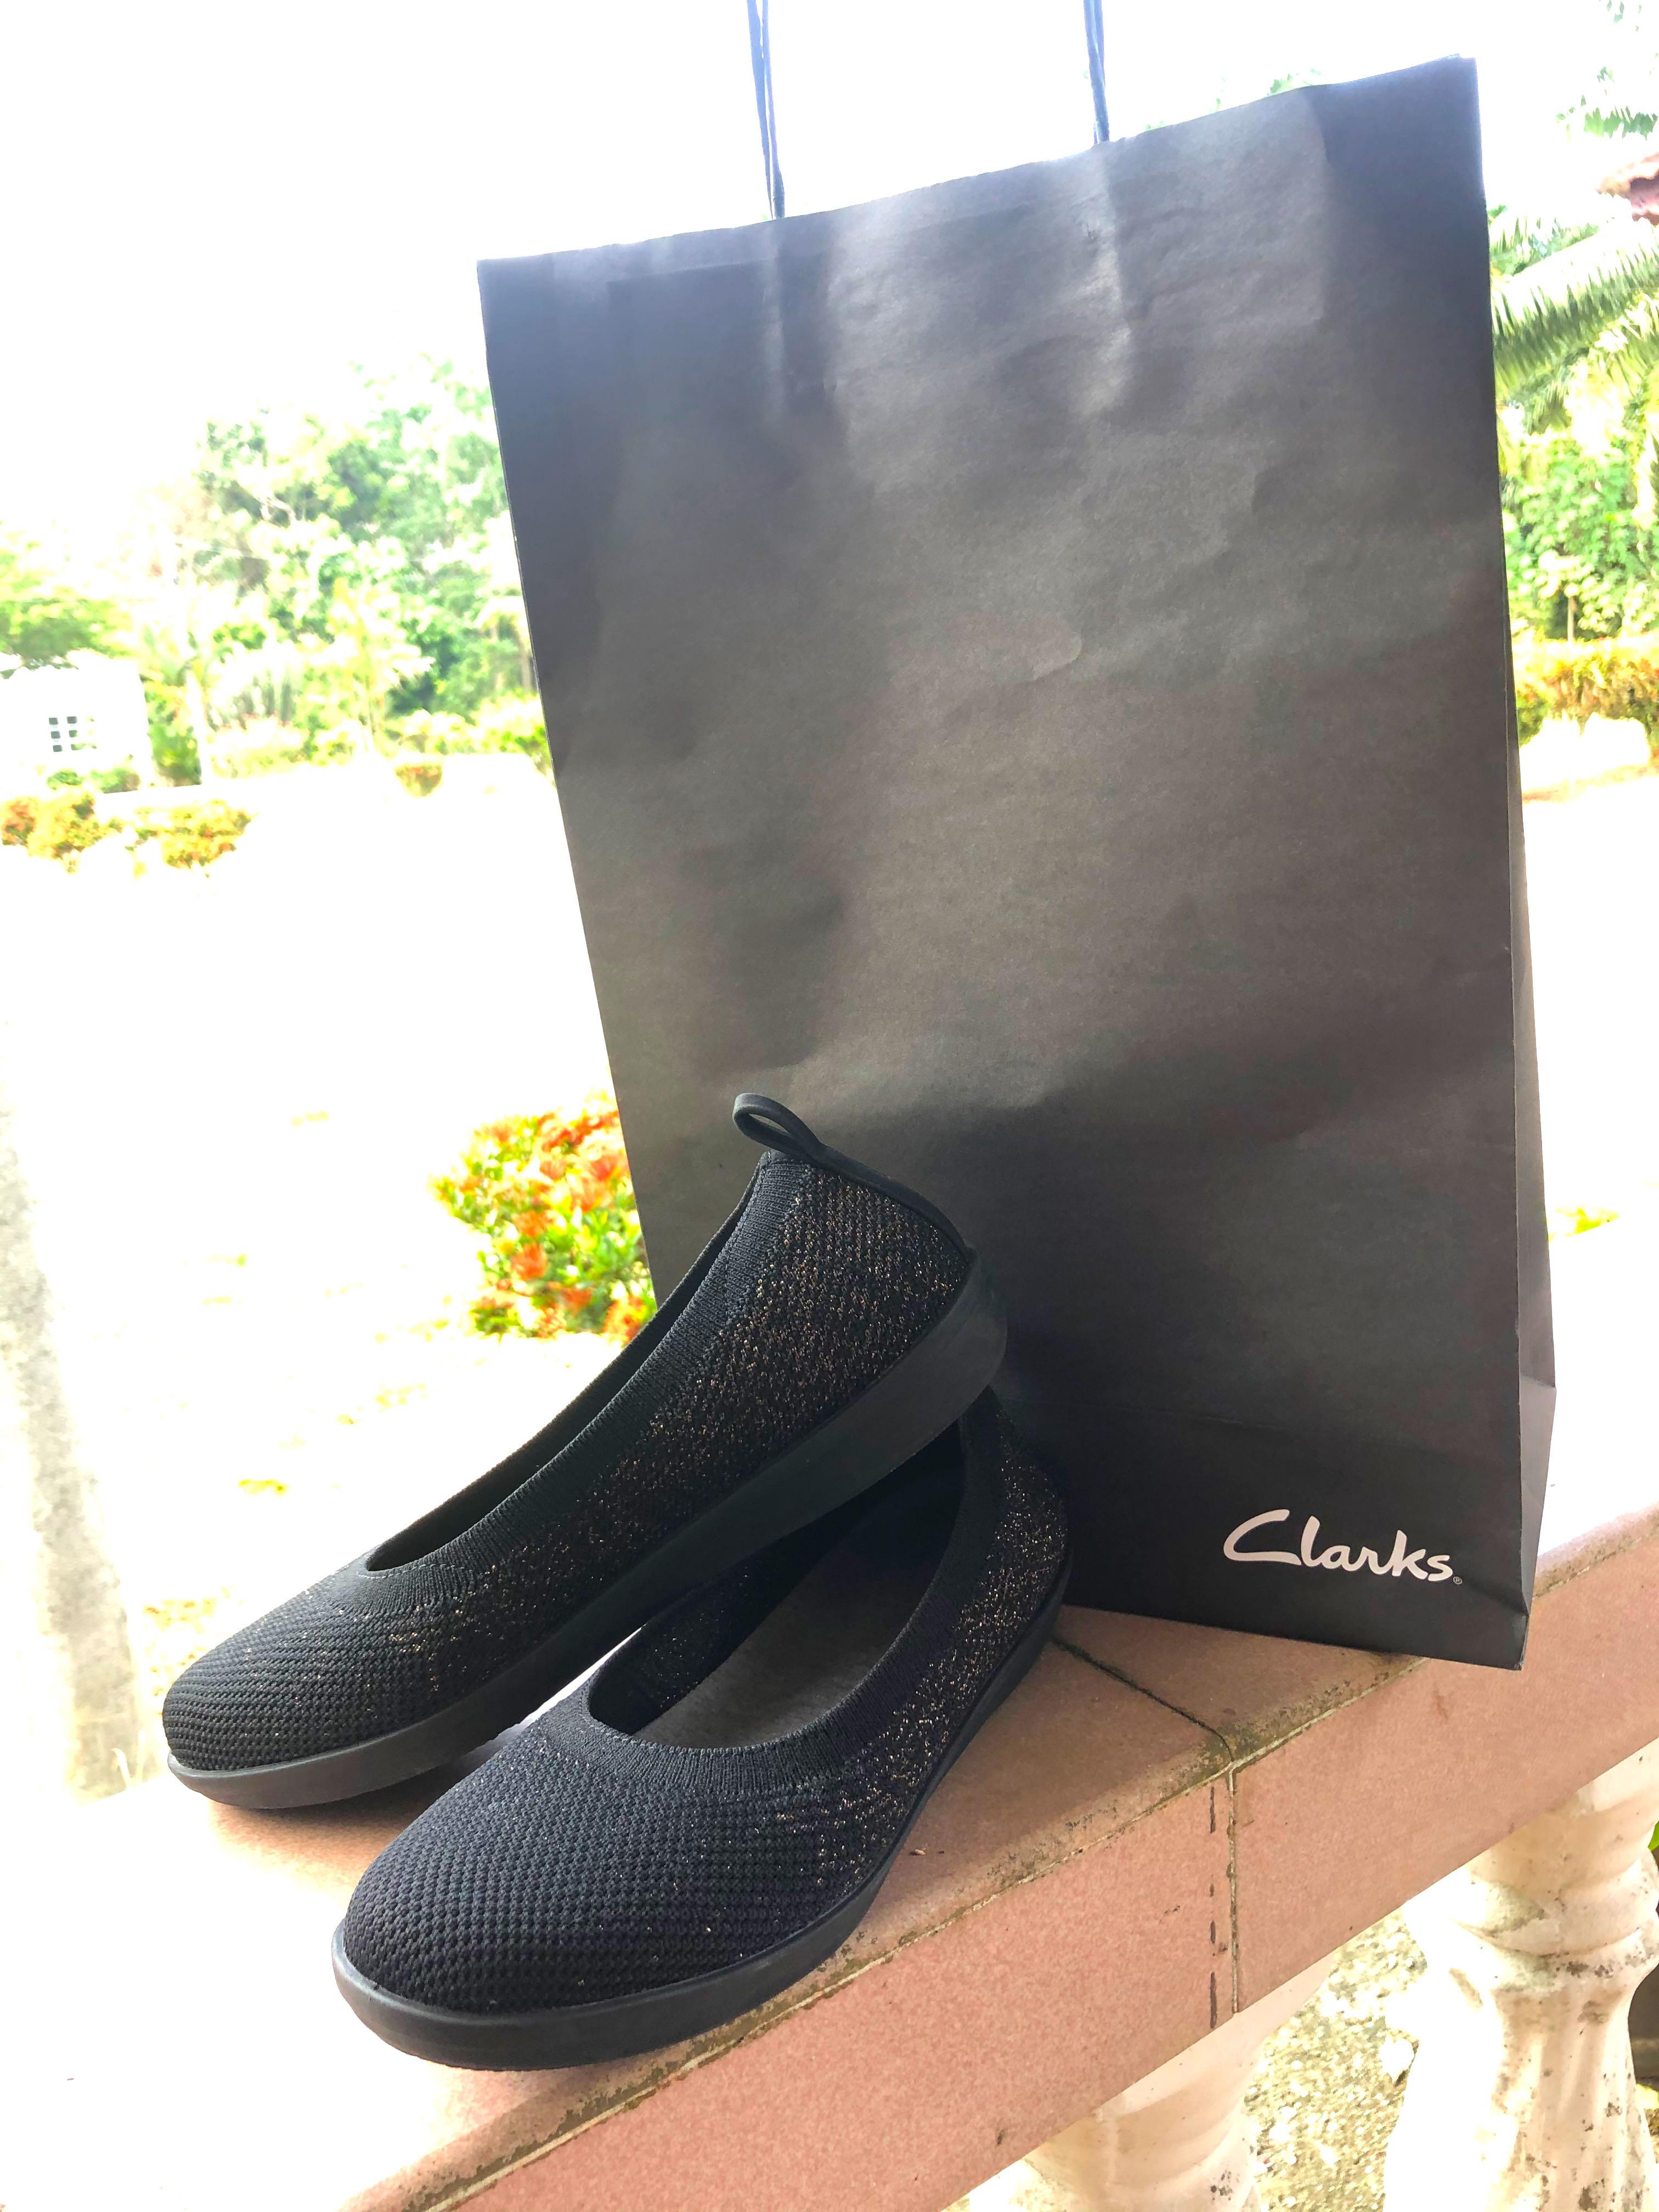 clarks ayla paige cloudsteppers